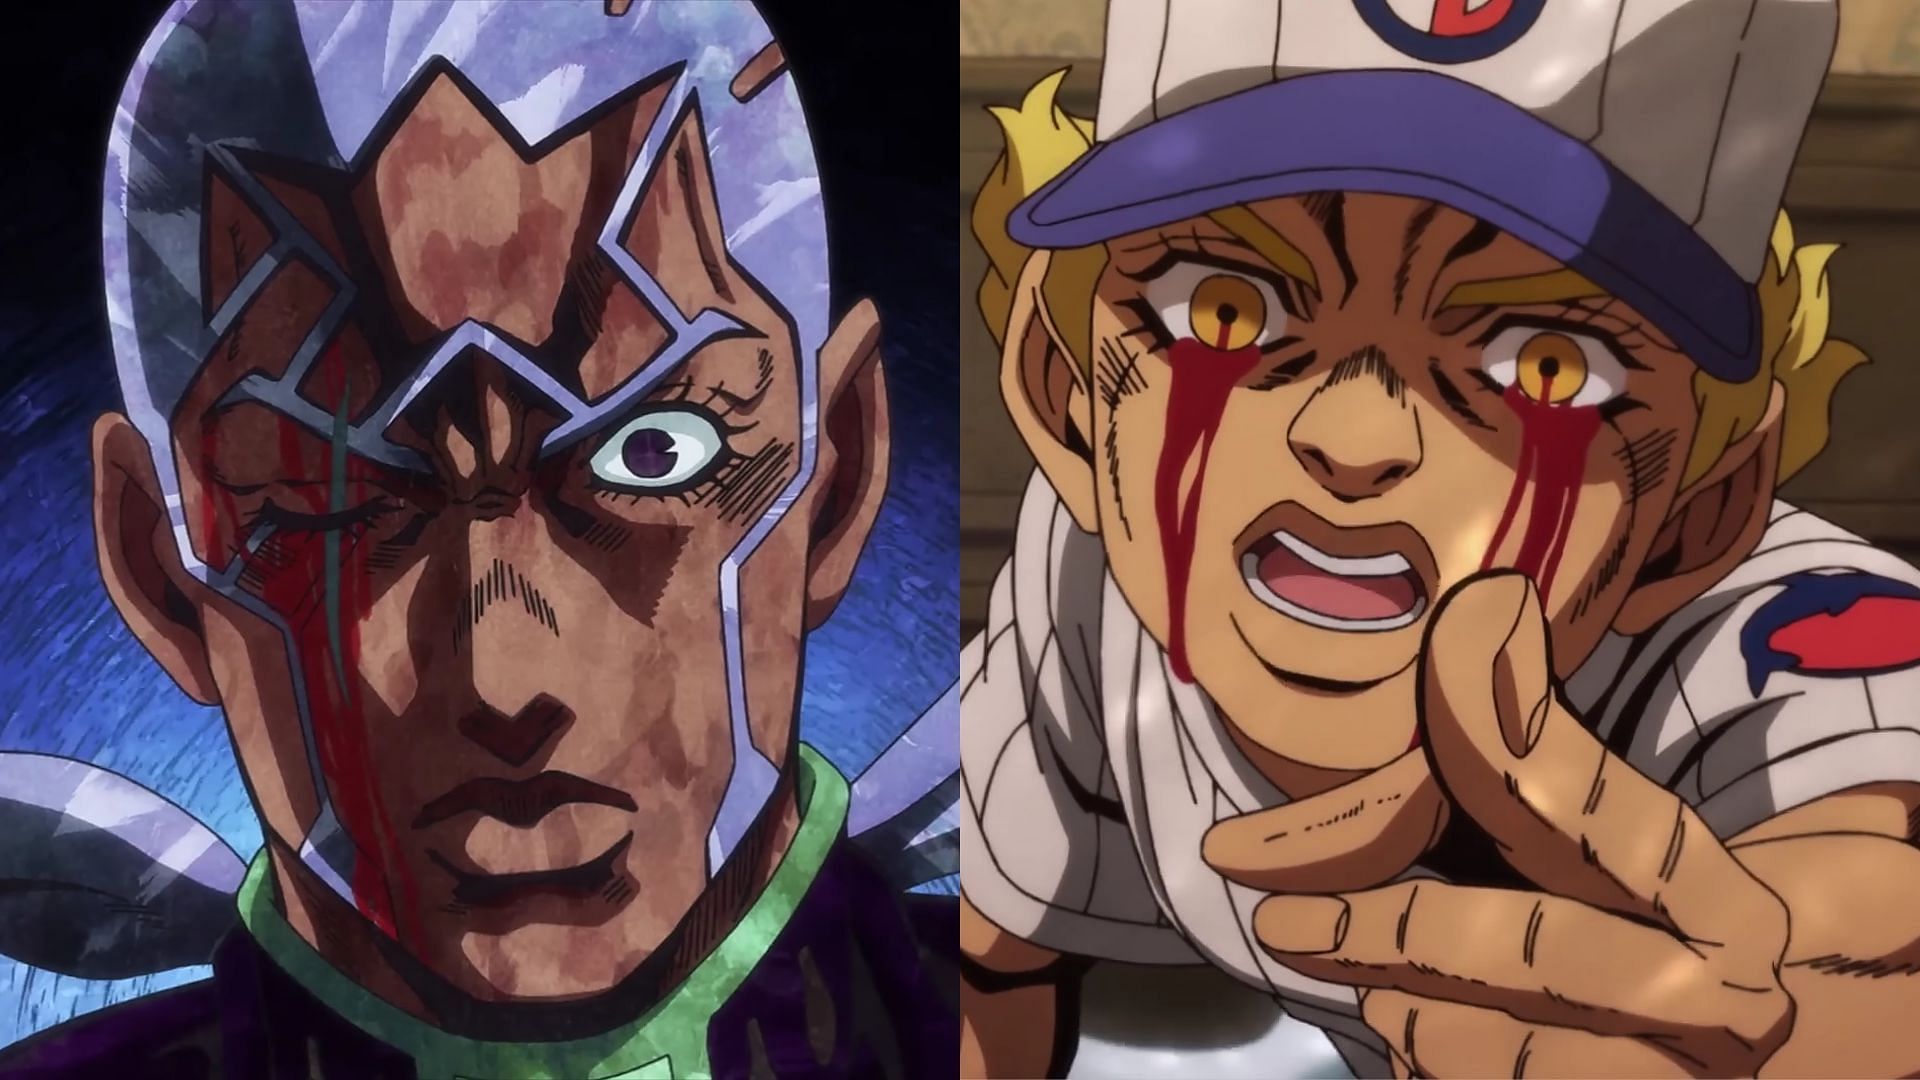 Pucci and Emporio as seen in JoJo